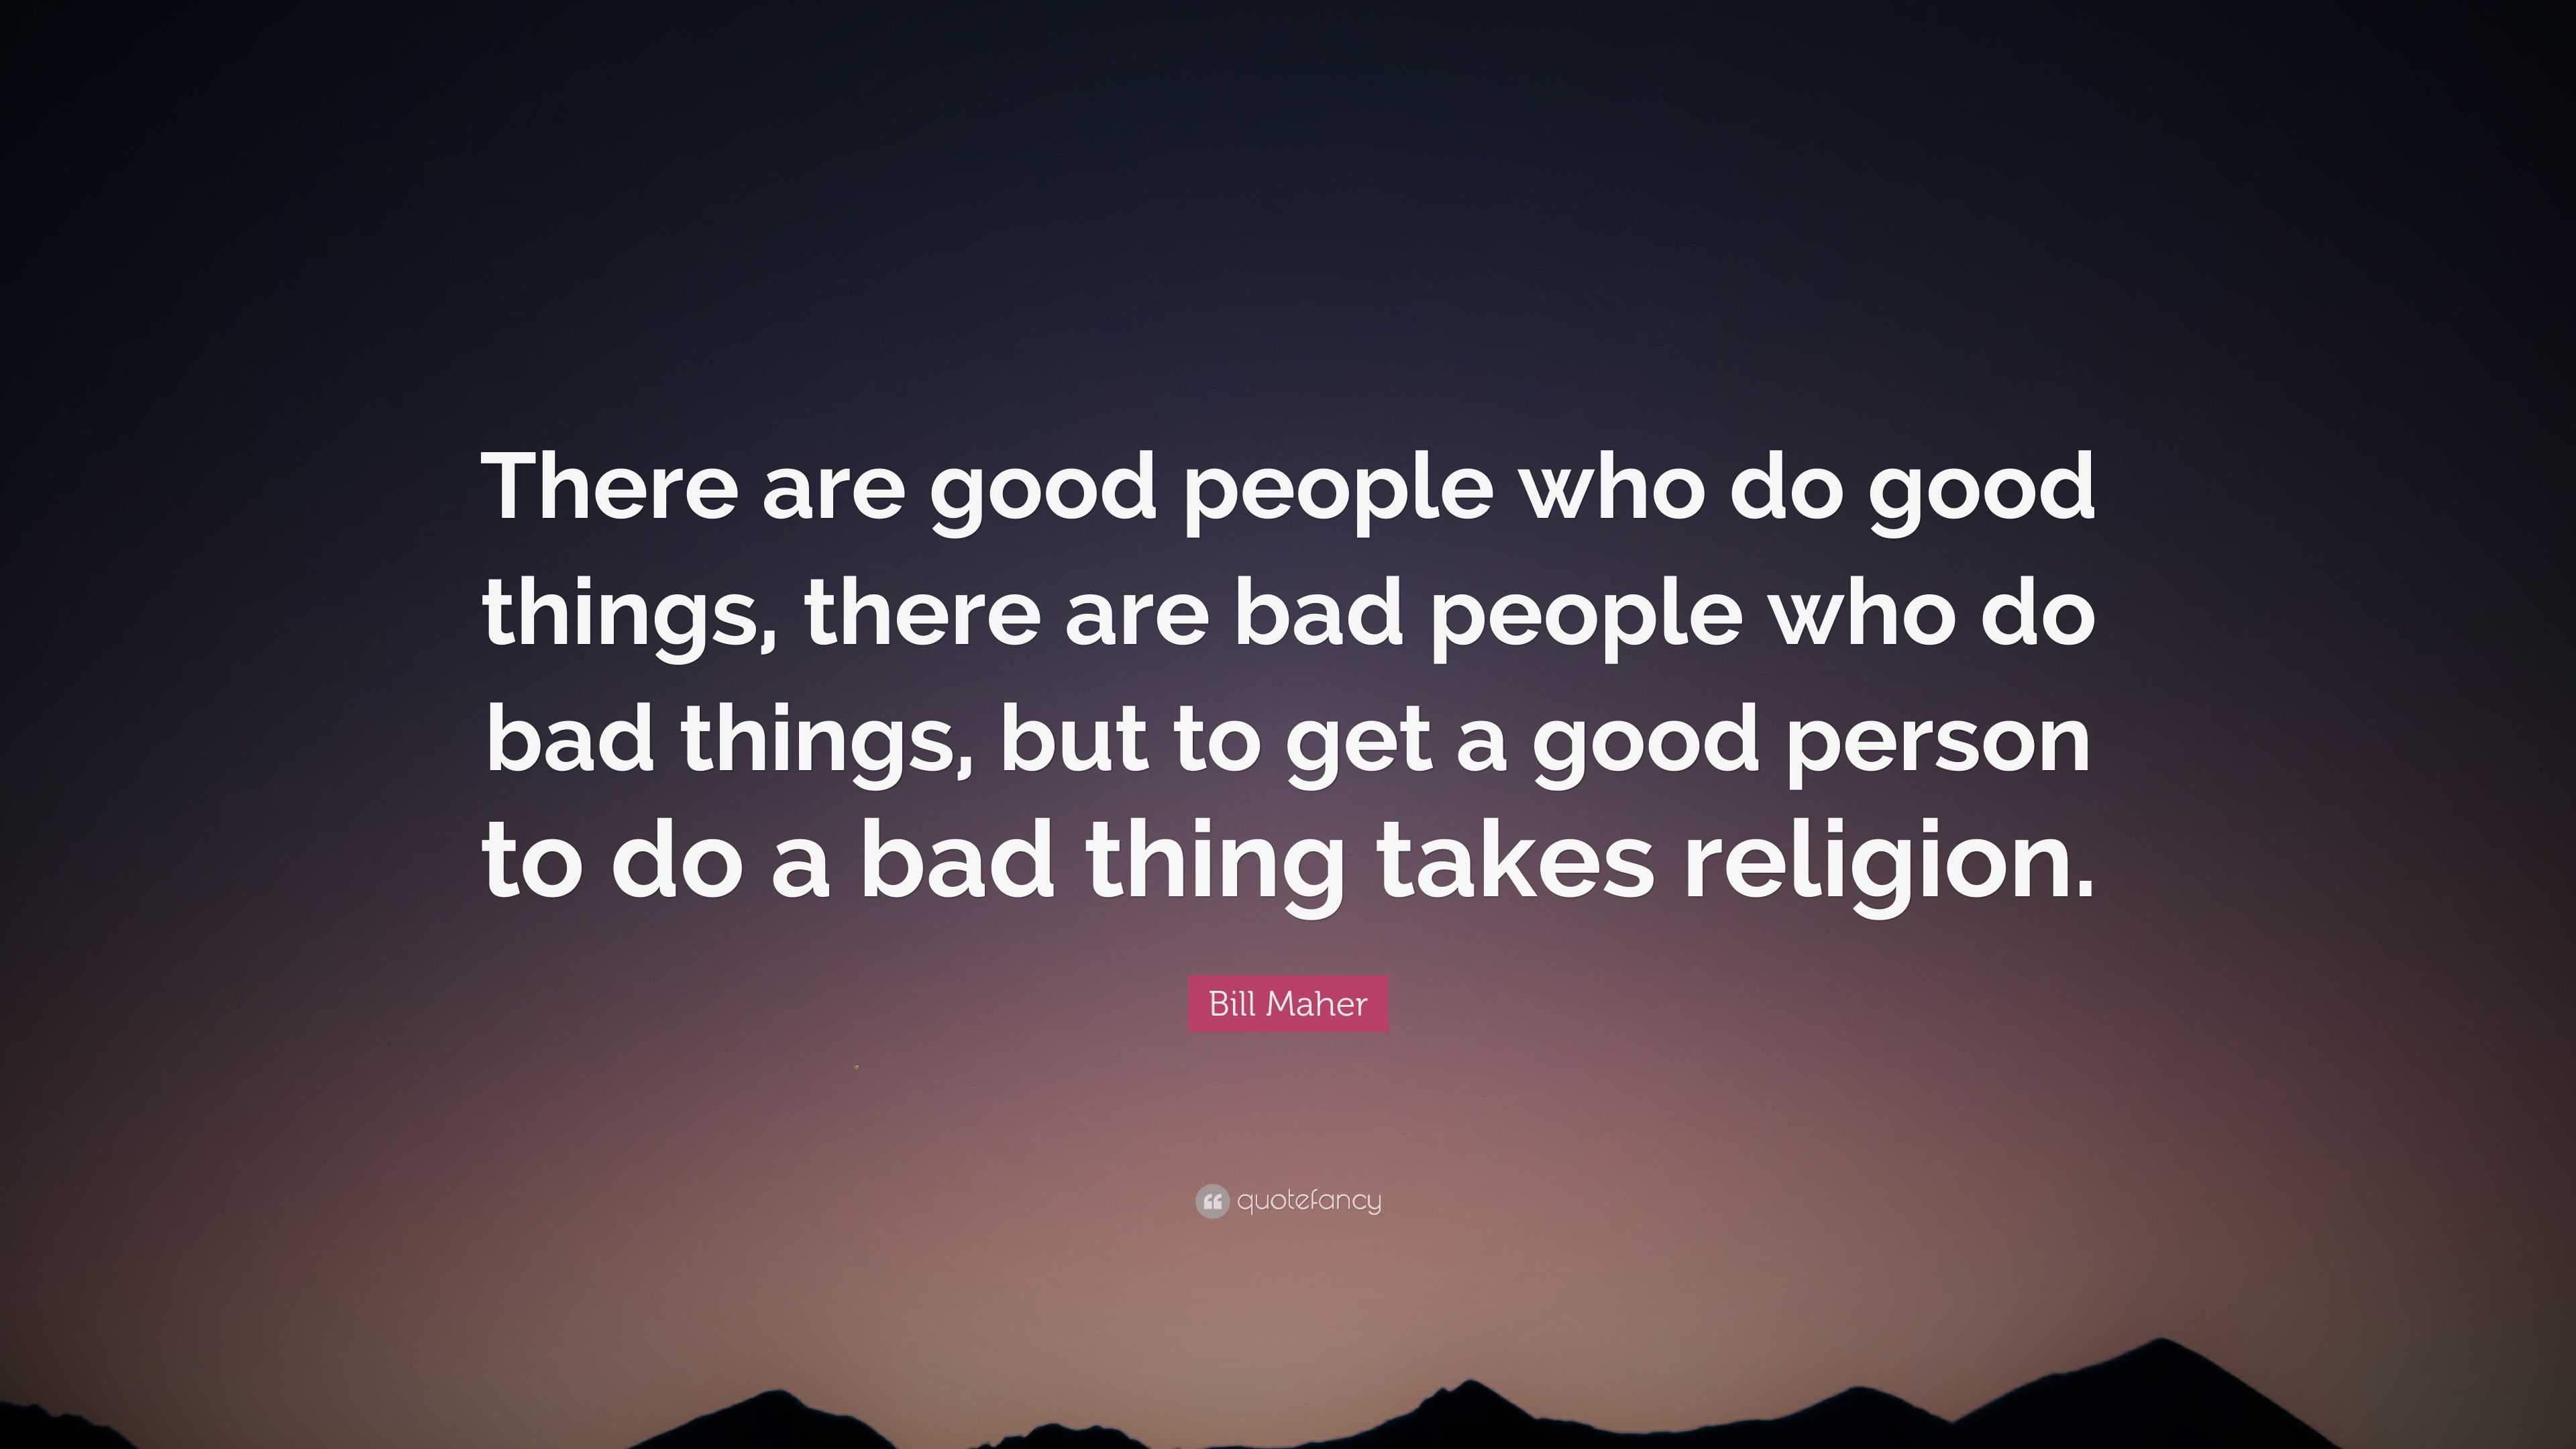 Bill Maher Quote: “There are good people who do good things, there are bad  people who do bad things, but to get a good person to do a bad t”